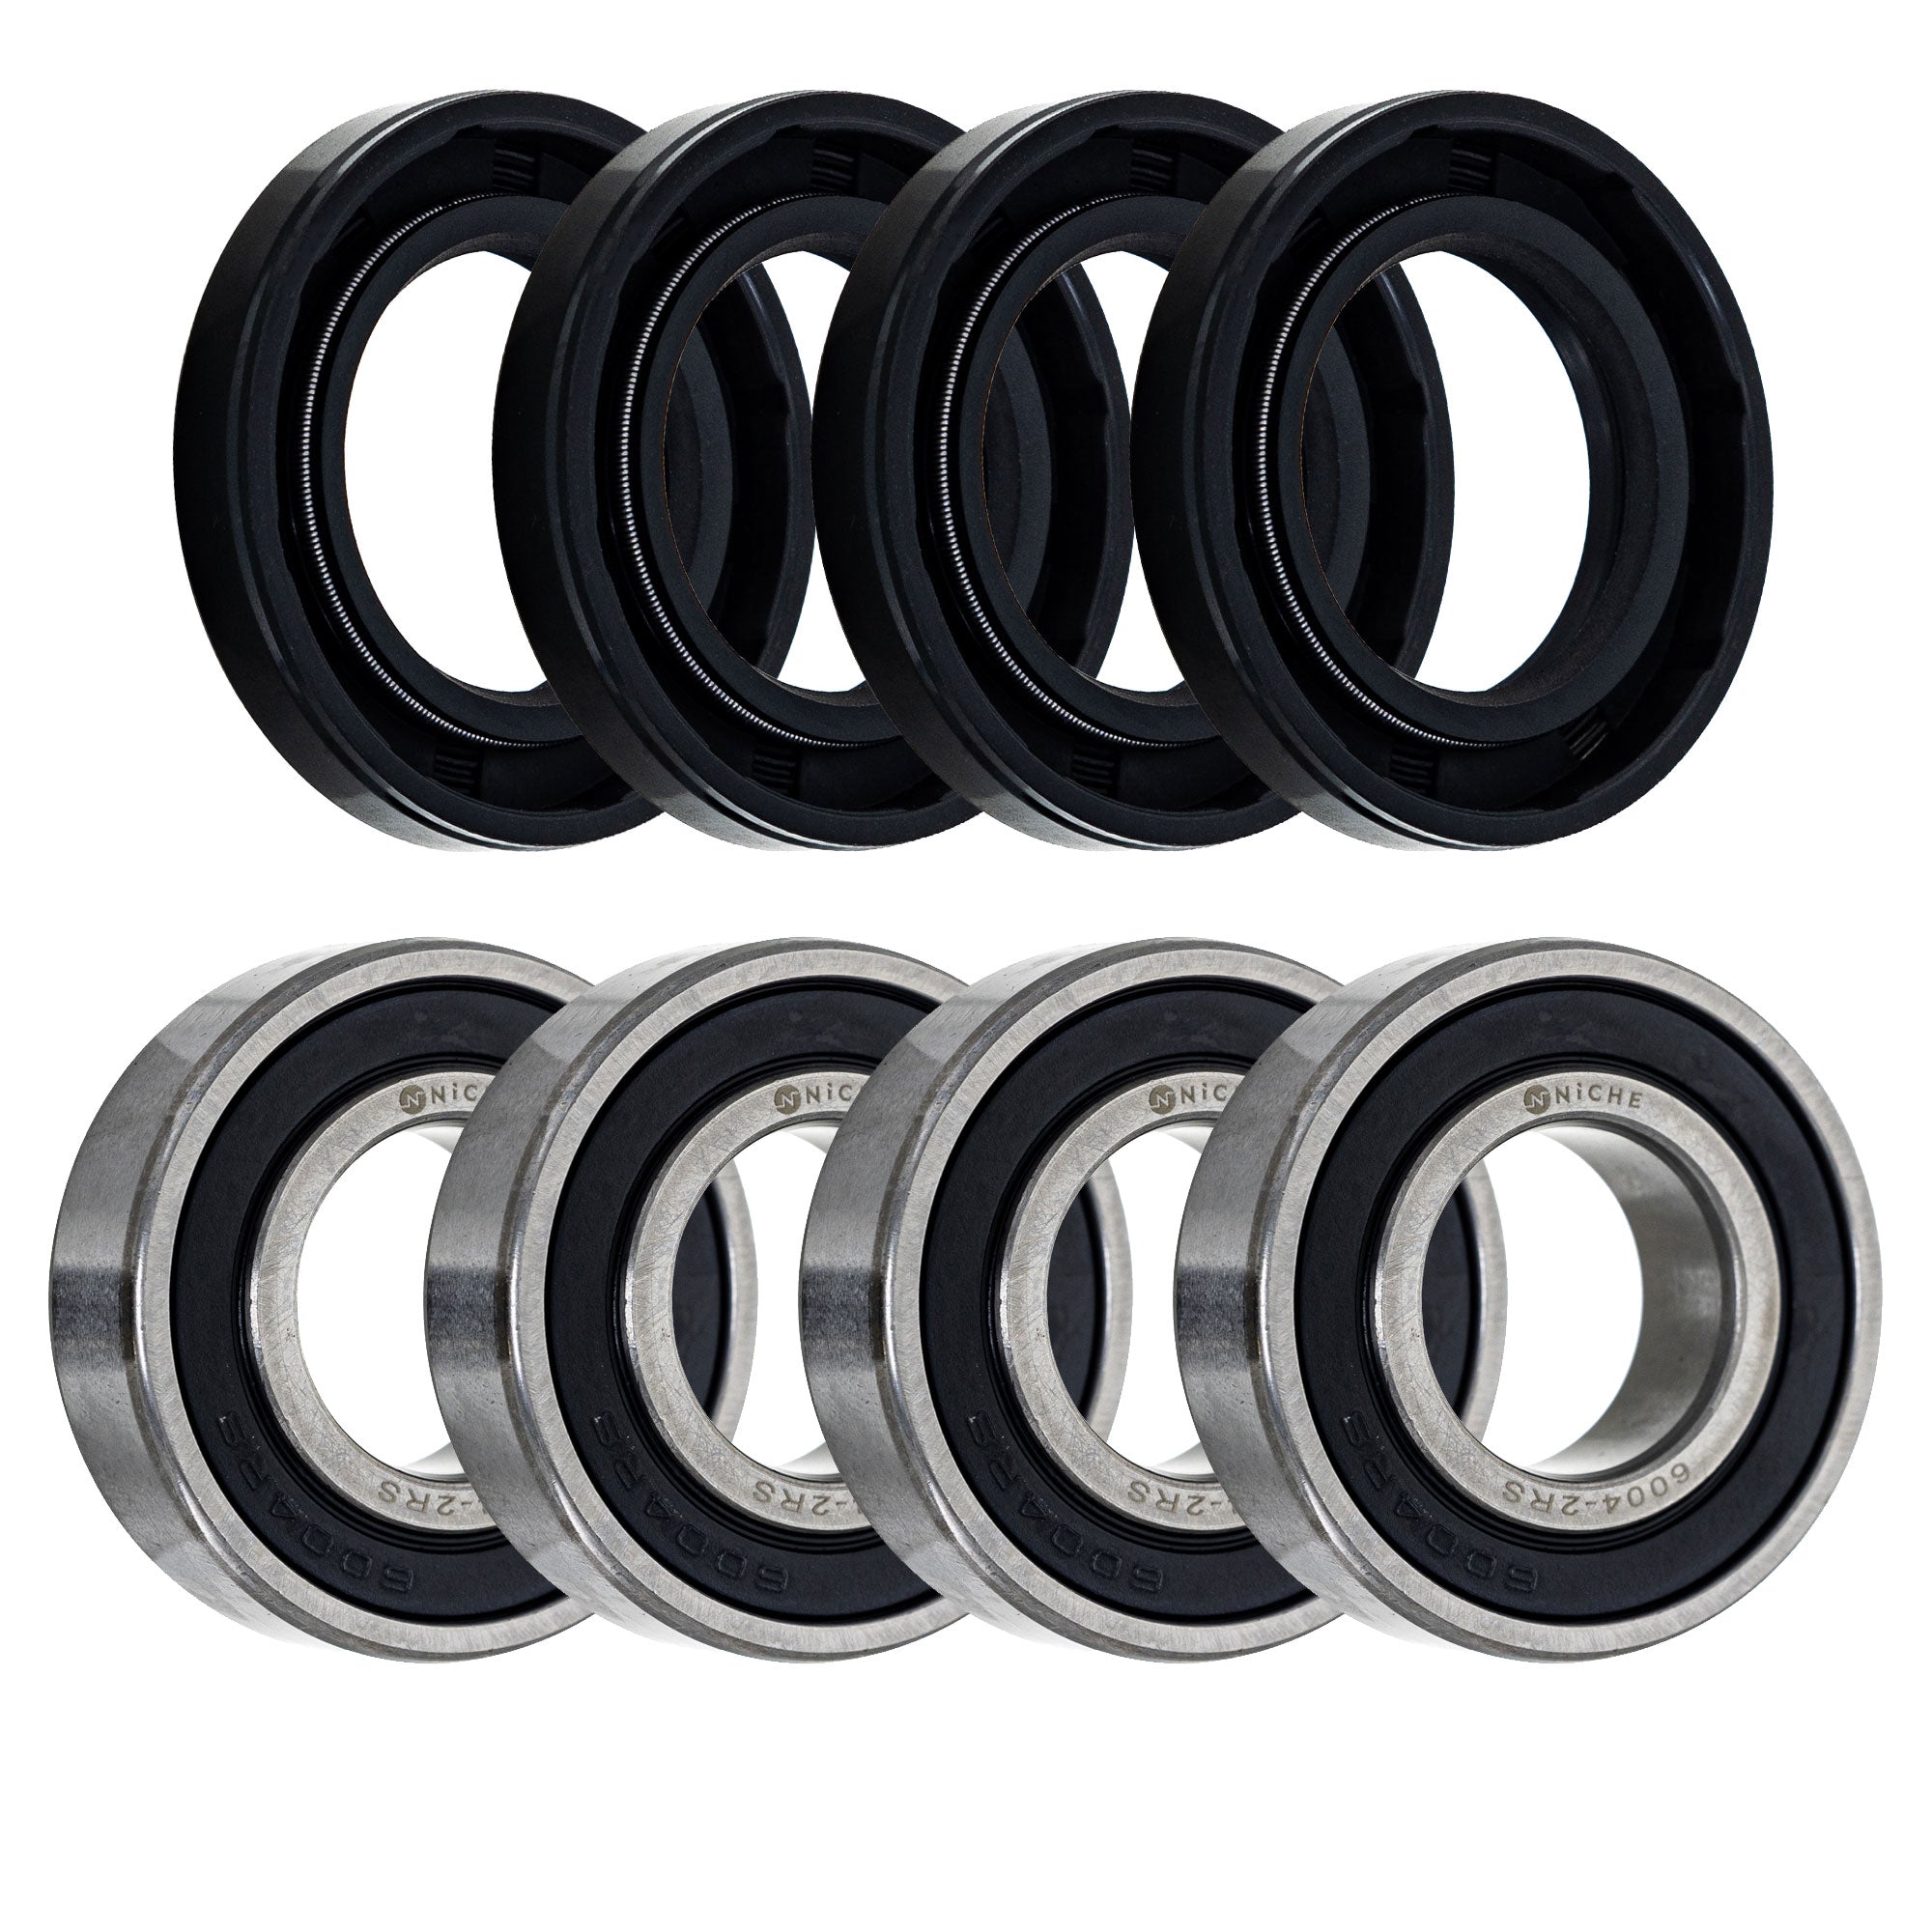 Wheel Bearing Seal Kit for zOTHER Ref No XR650R Super ST1100 Shadow NICHE MK1008256